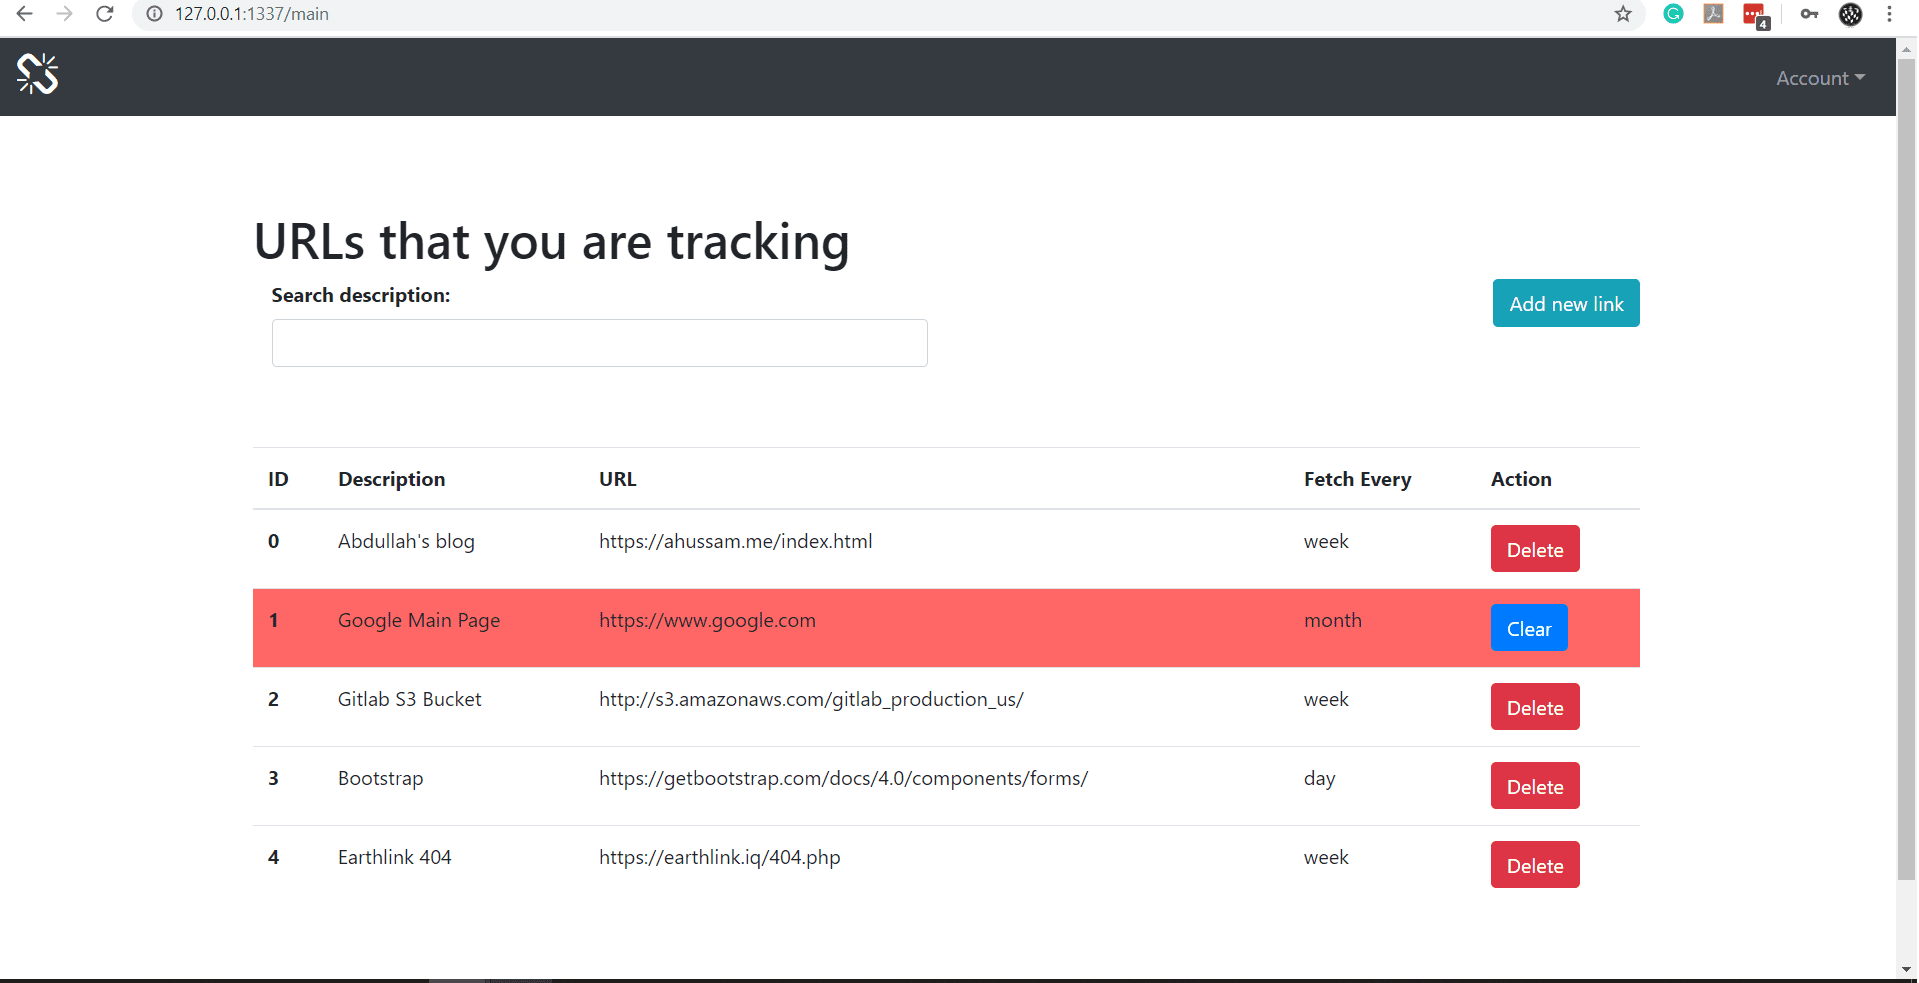 Url tracking. Track check in. Click a tracked URL to view details. Click a tracked URL (if any) to view details.